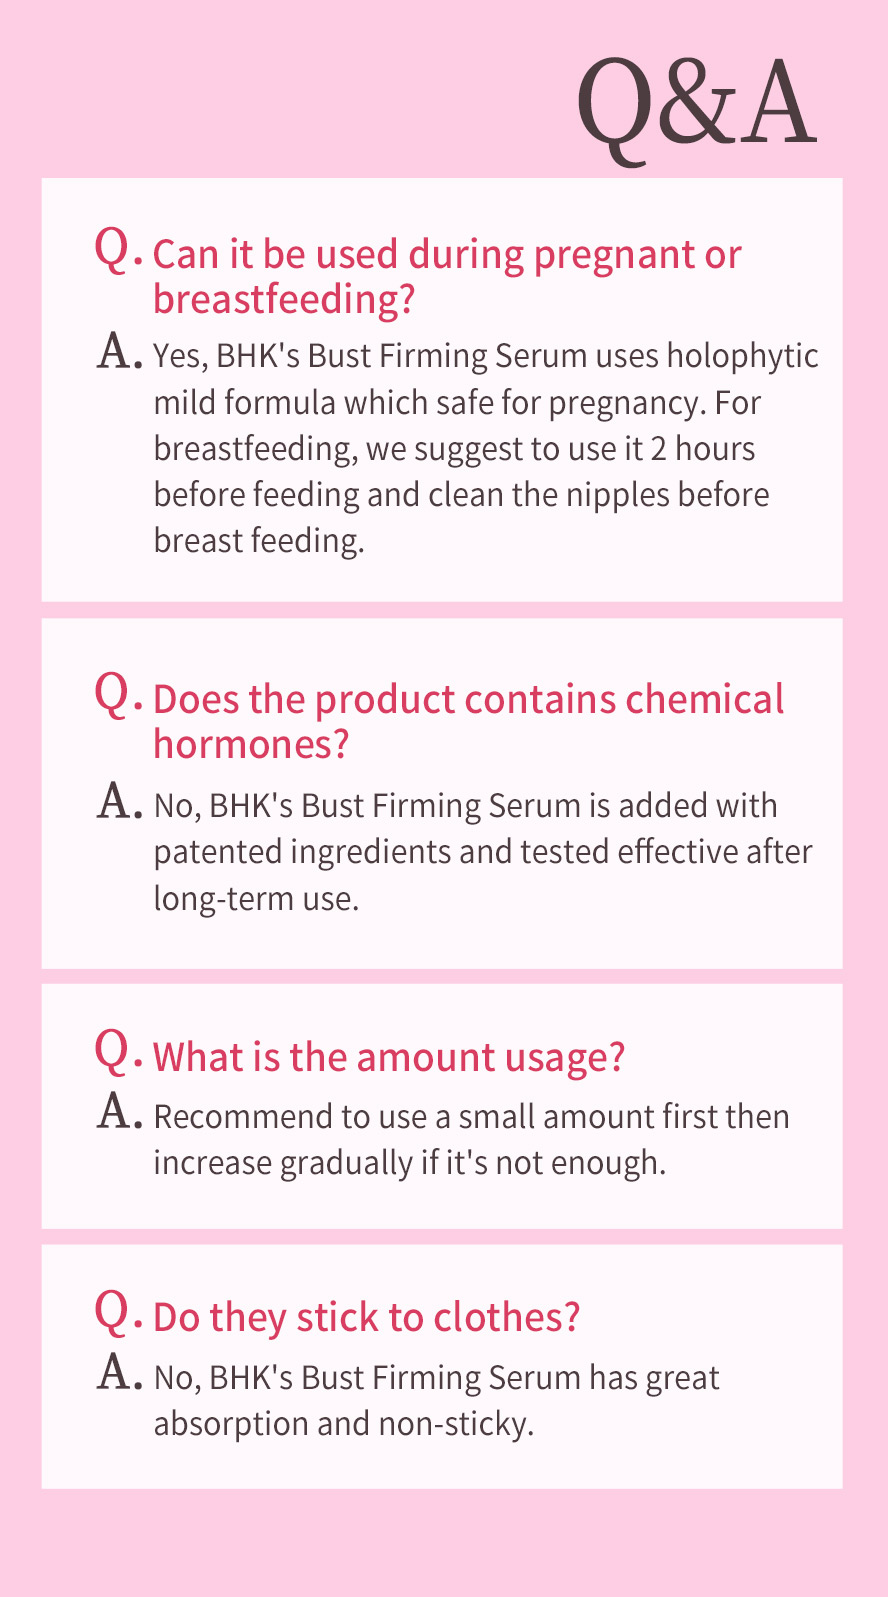 It can be used during breastfeeding period for better breast shape with safe & medicine added